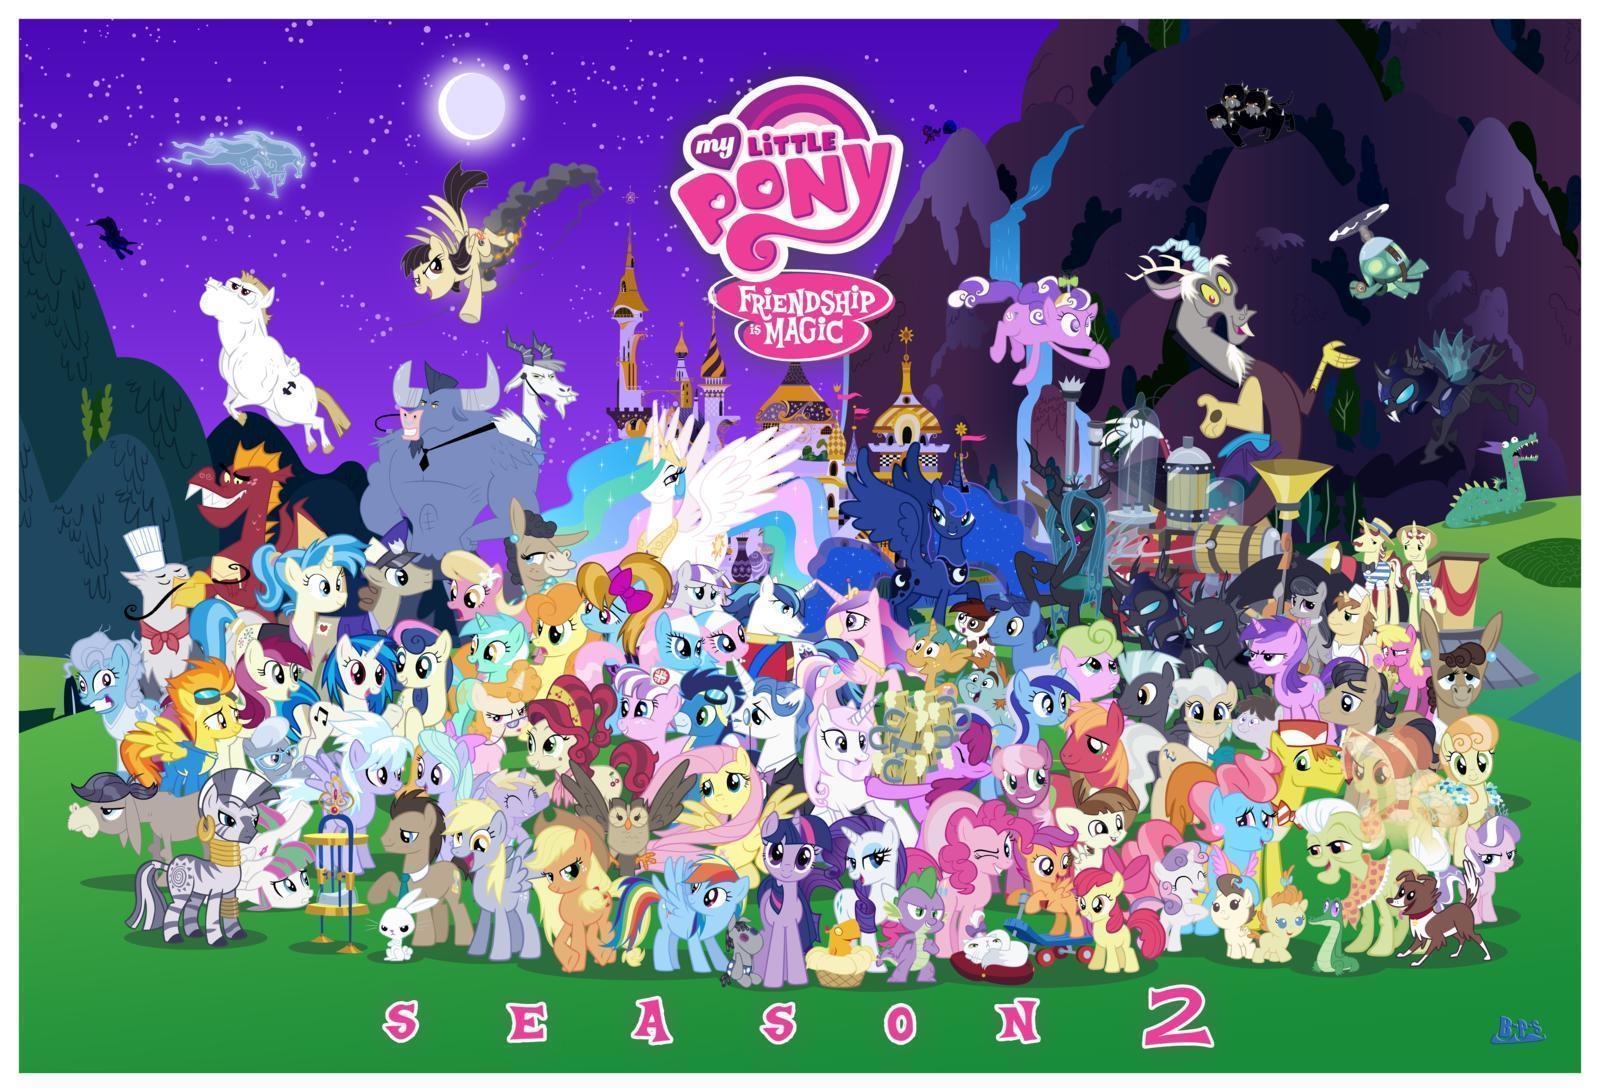 My Little Pony Friendship Is Magic Wallpapers - Wallpaper Cave